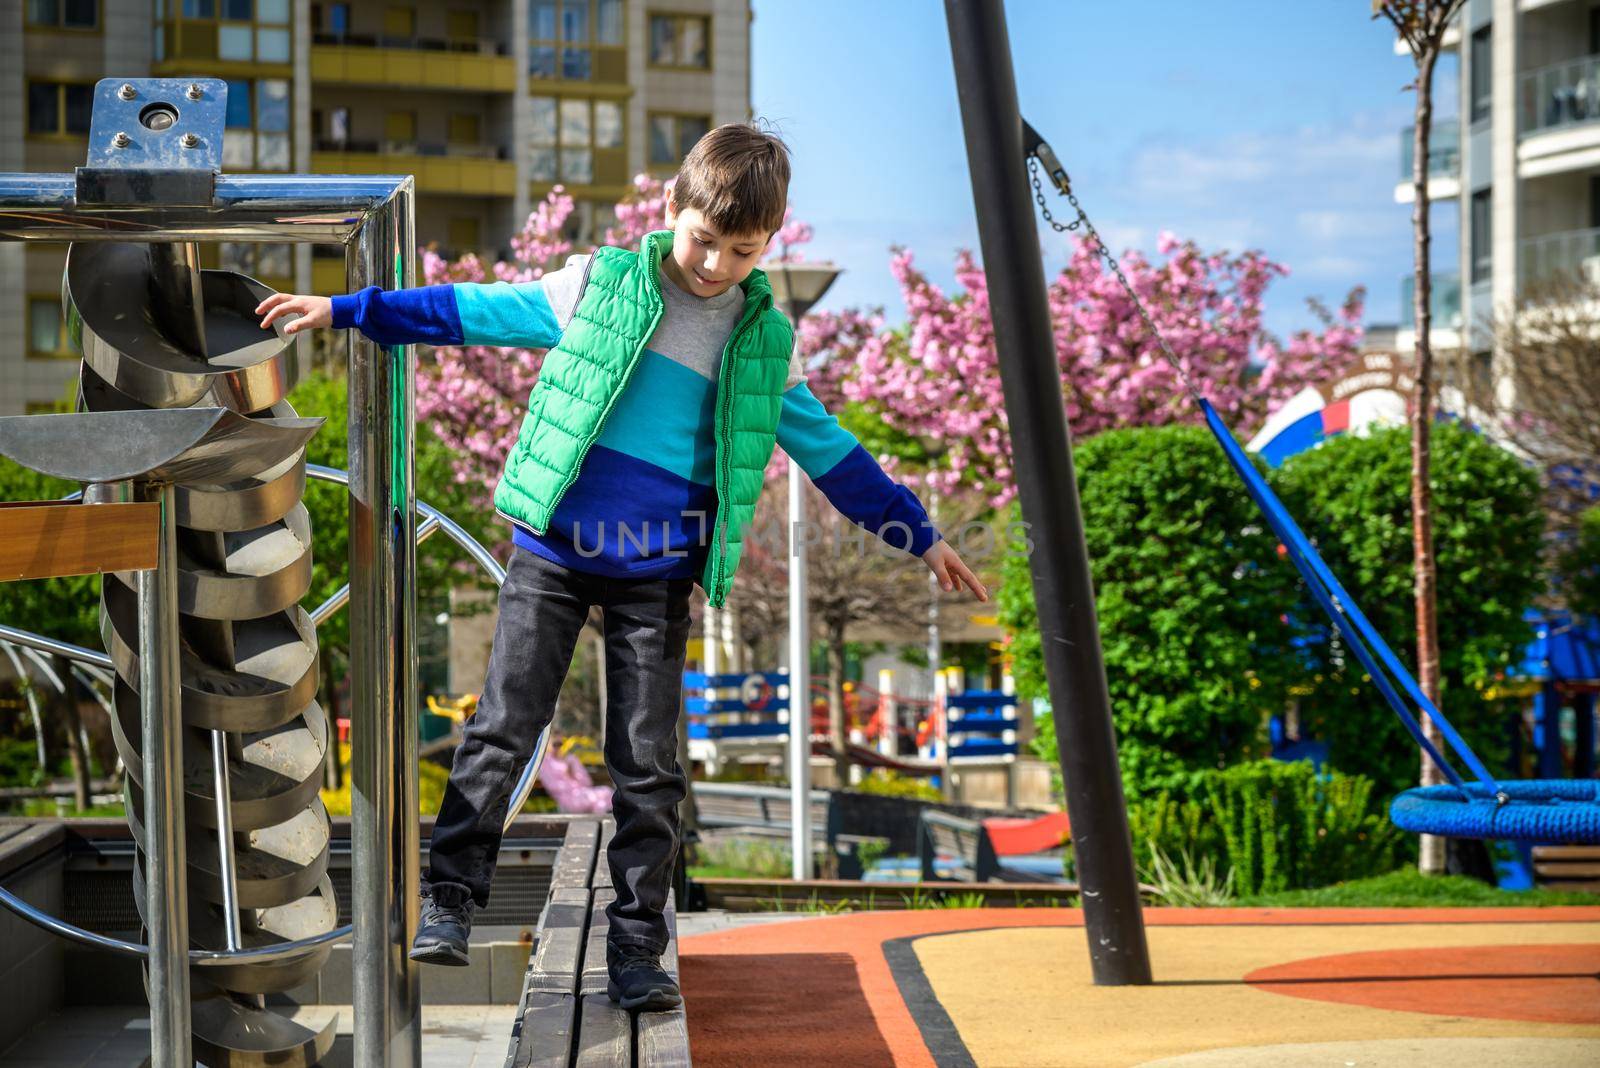 Children's obstacle course on a modern playground. Kid crossing a wooden bridge or other barriers using his body balance. Development of the child's agility and courage.